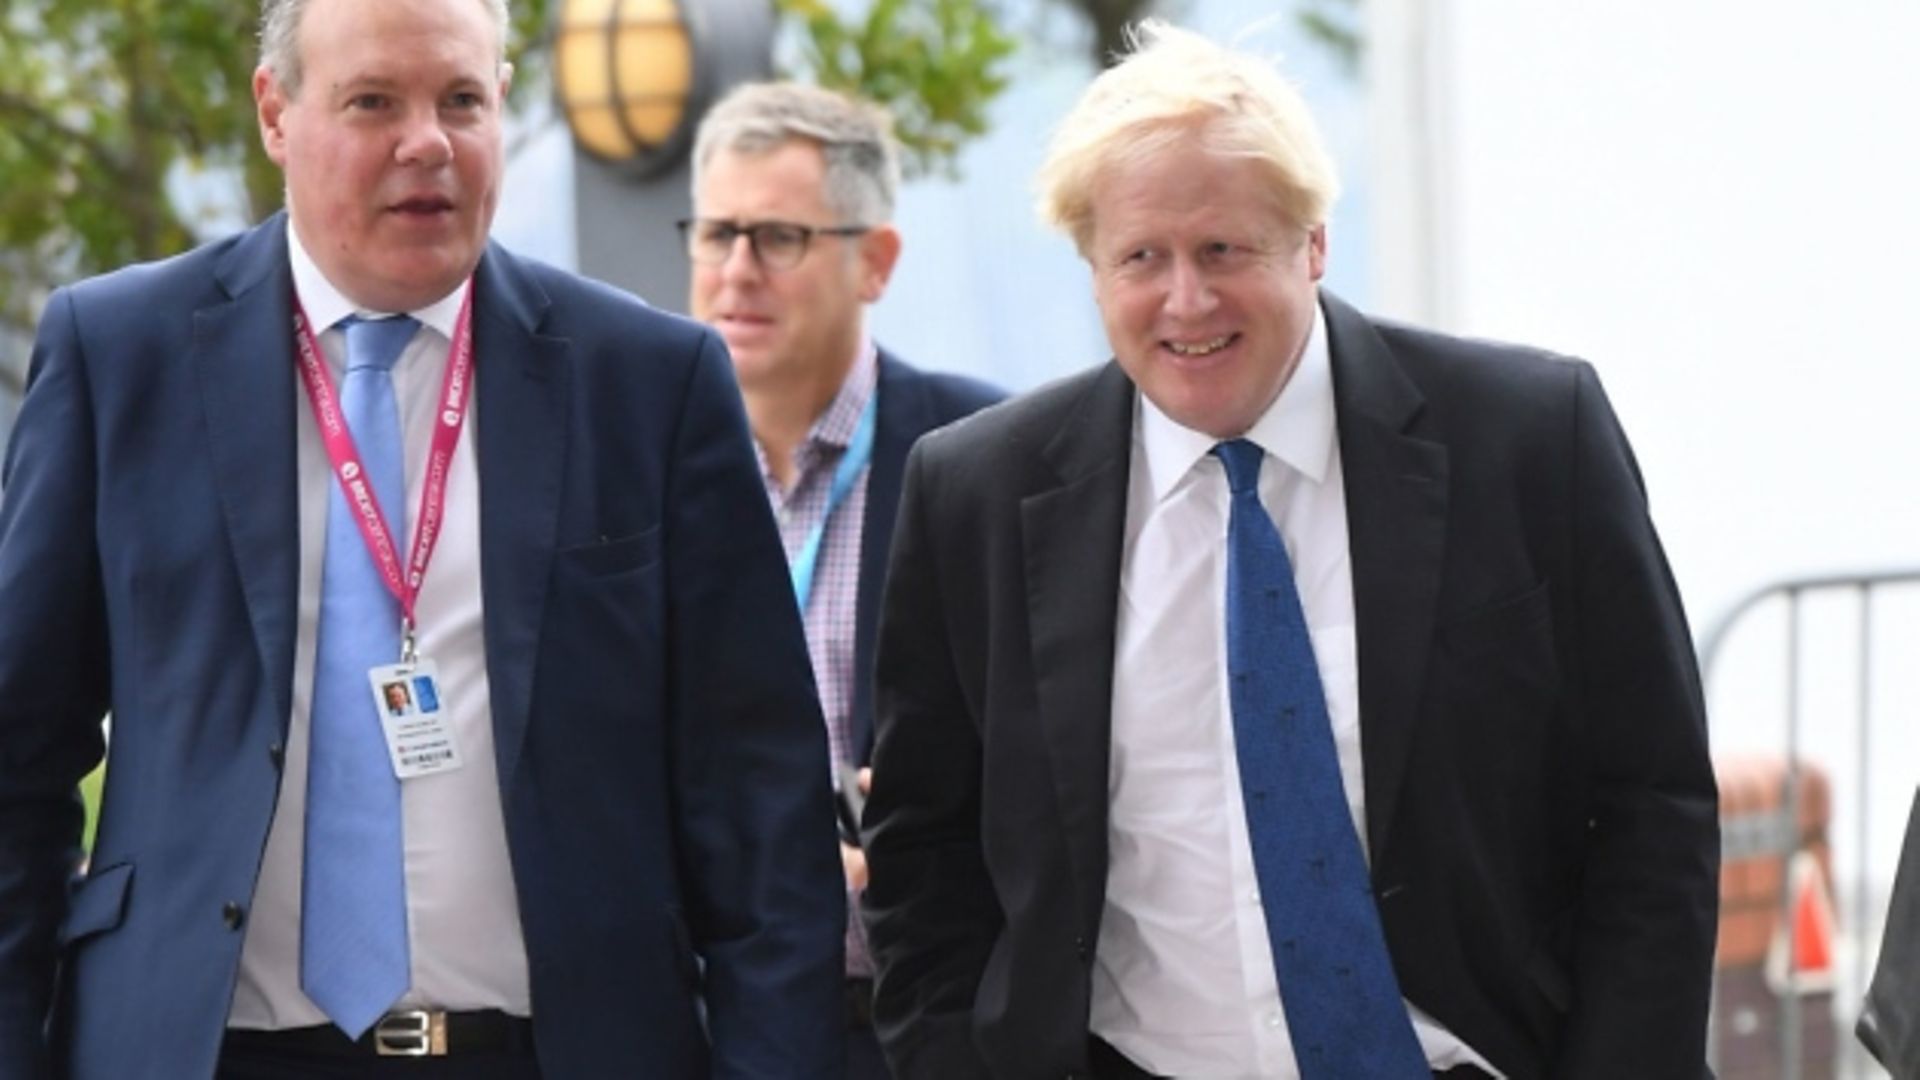 Conor Burns (L) arrives at the Conservative Party annual conference in 2018 alongside then foreign minister Boris Johnson. Photograph: Stefan Rousseau/PA Wire